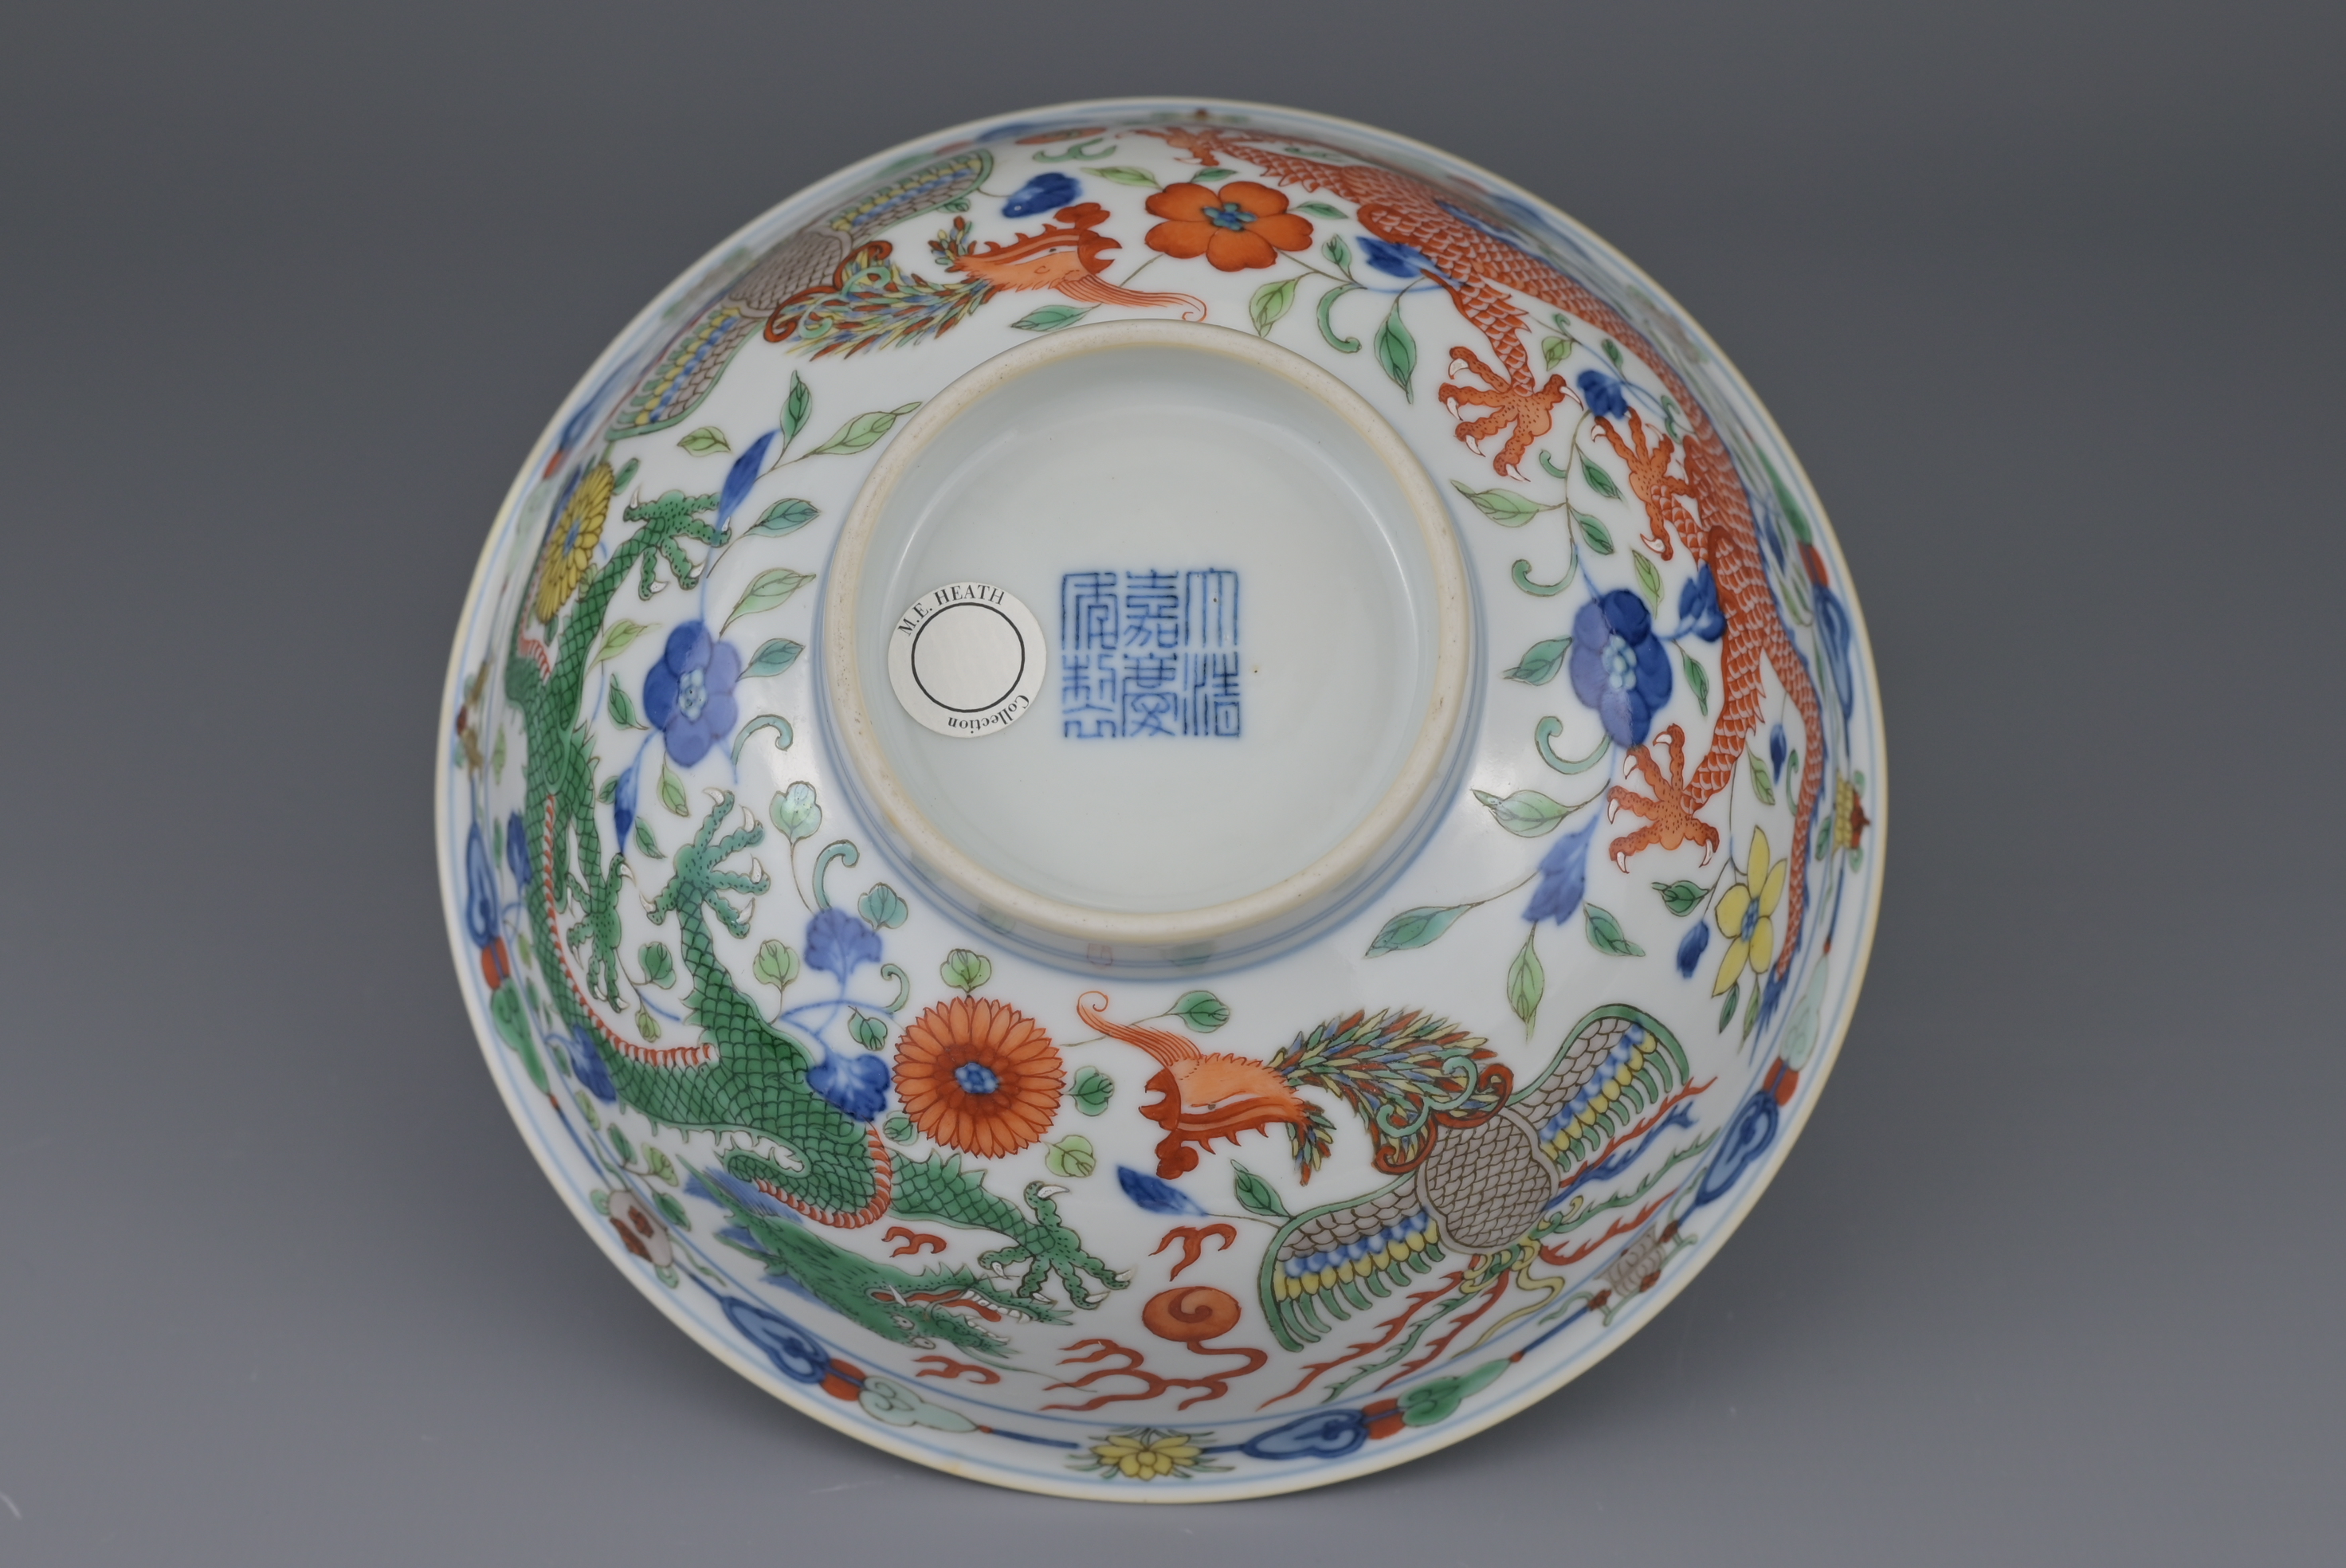 FINE CHINESE WUCAI ‘DRAGON & PHOENIX’ PORCELAIN BOWL, JIAQING MARK AND PERIOD, EARLY 19th CENTURY - Image 8 of 14